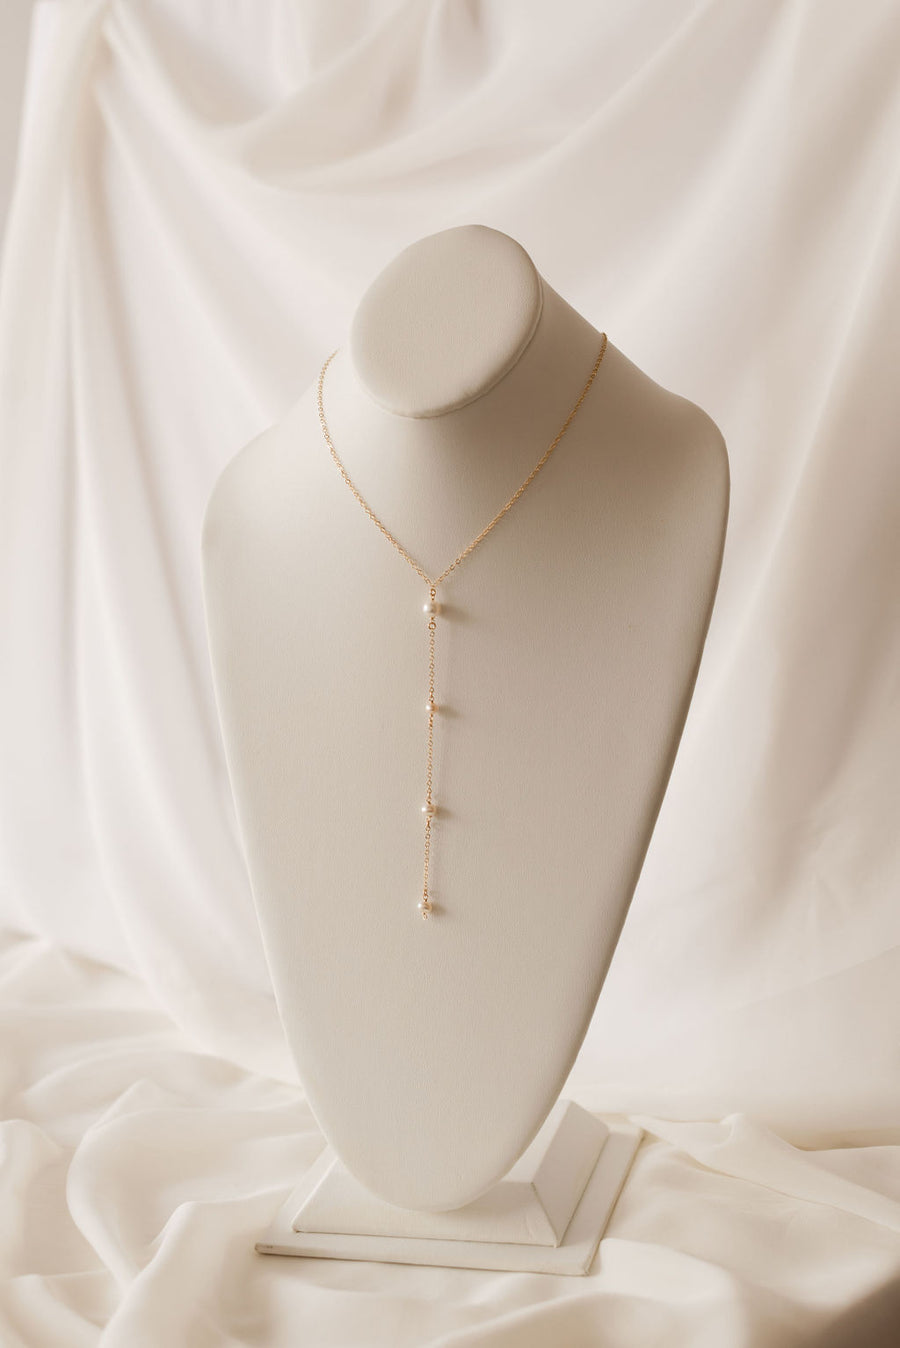 Backdrop Necklace – How to Accessorize from All Angles